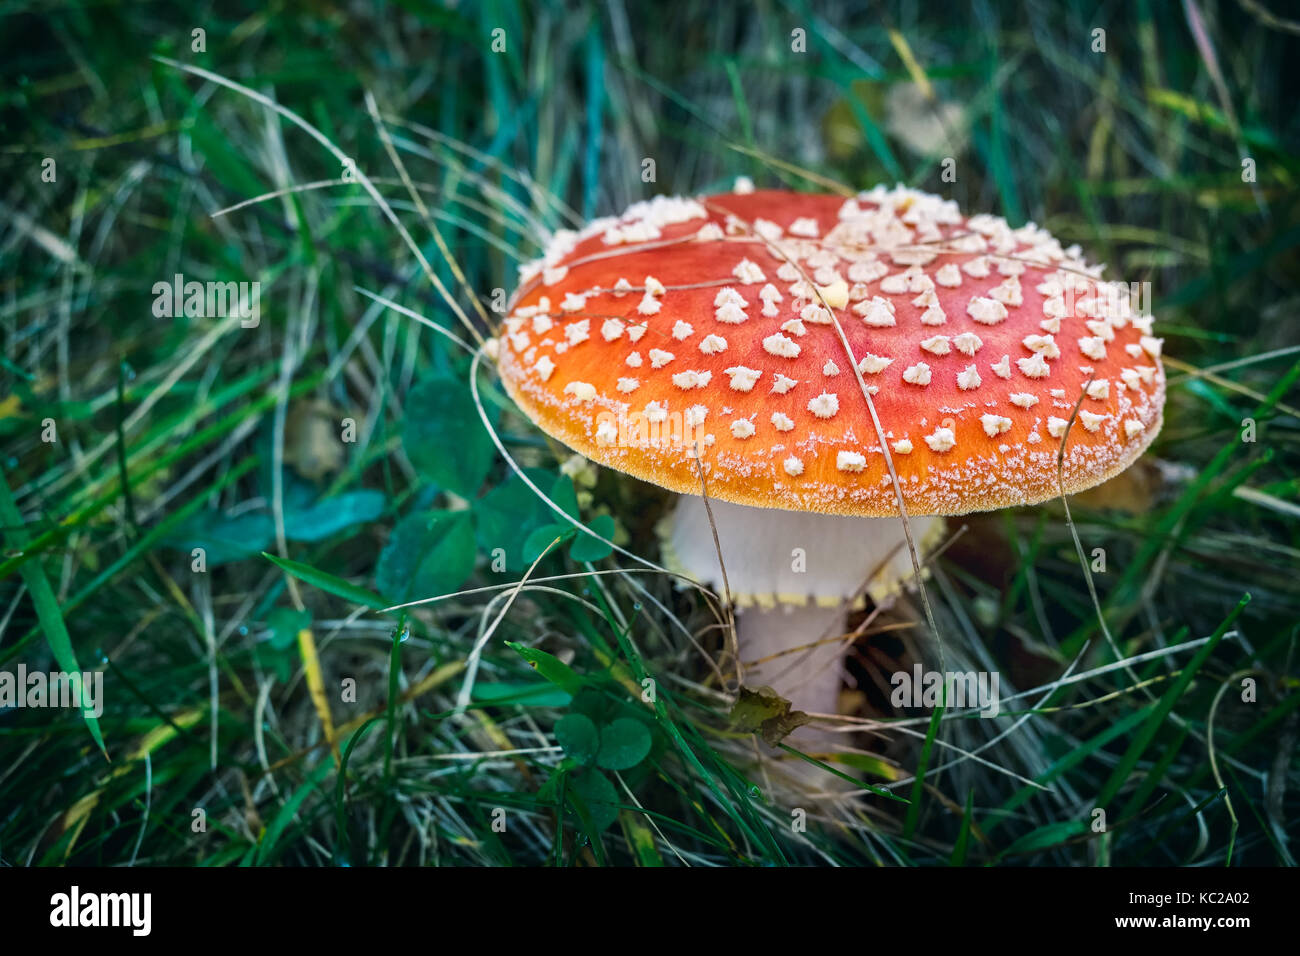 Close-up picture of a Amanita poisonous mushroom in nature, Valsassina, Italy Stock Photo